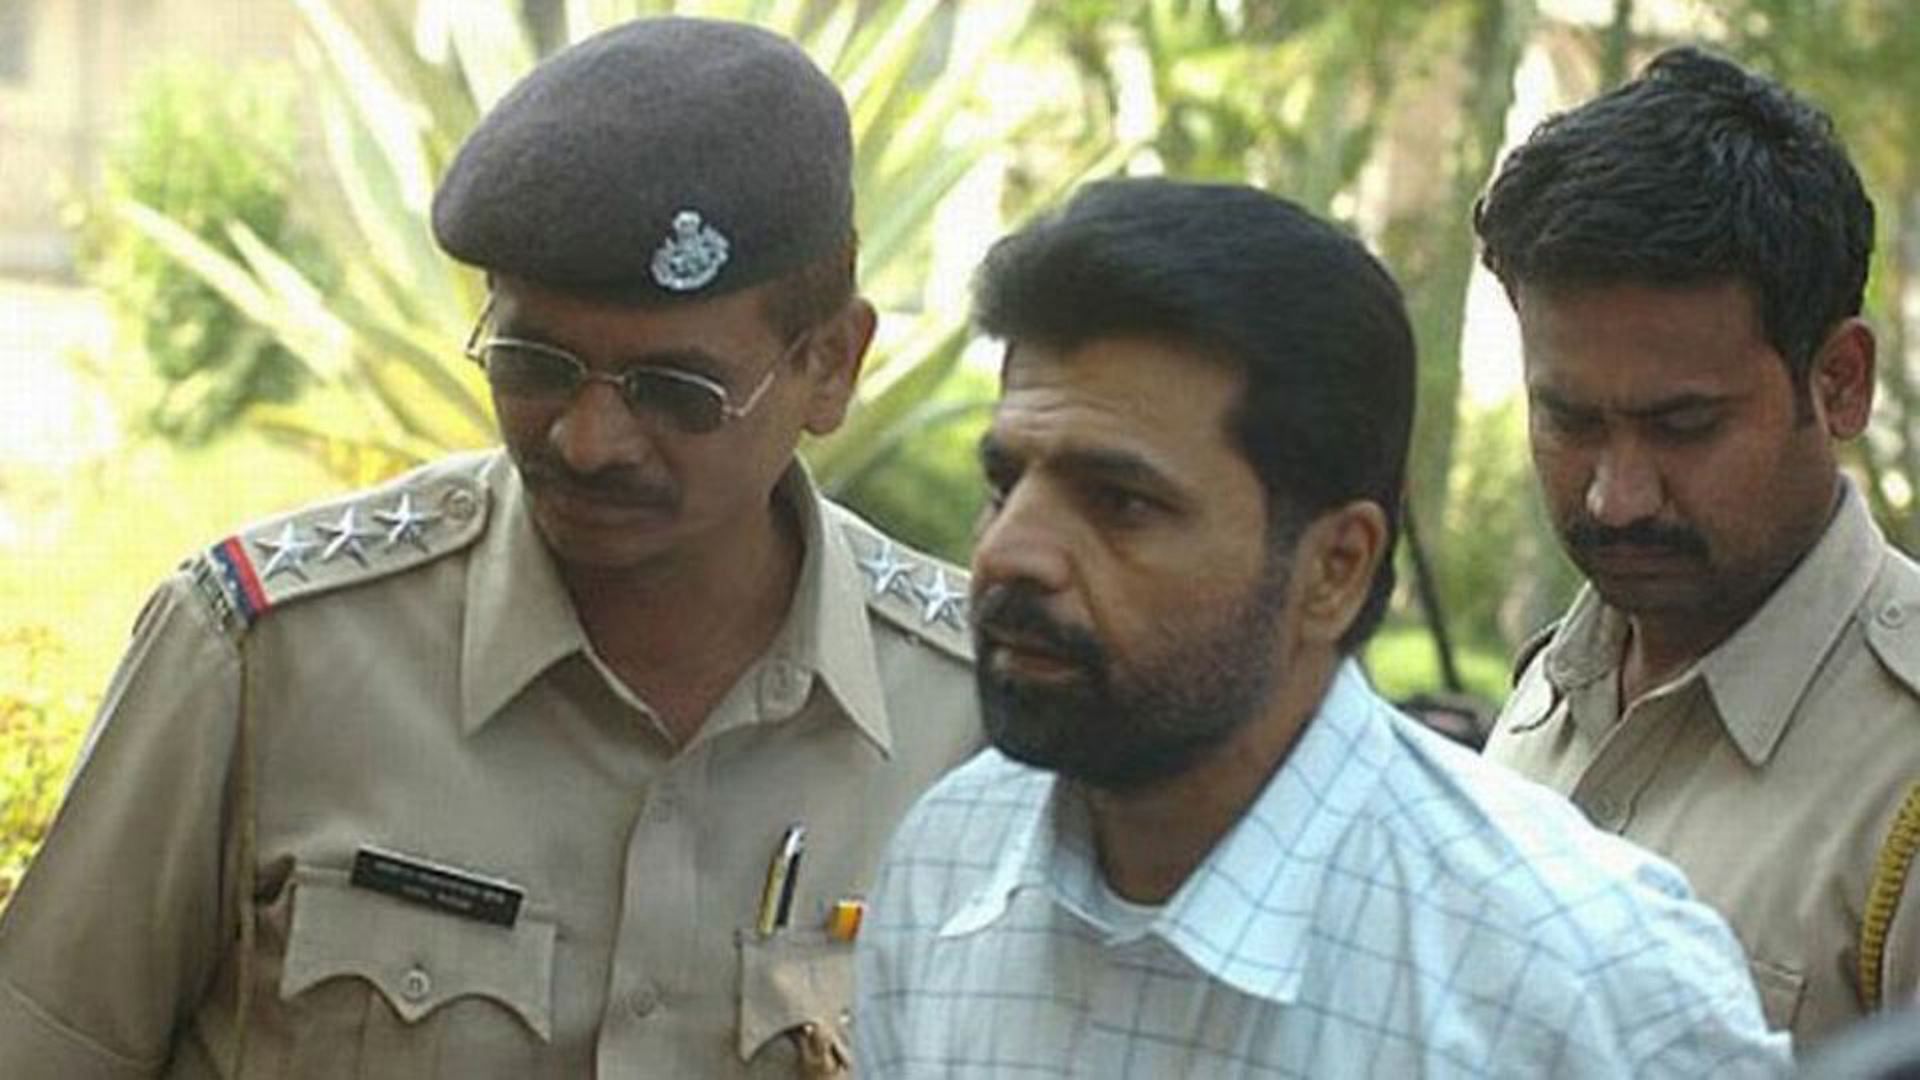 SC has dismissed curative petition against the death sentence handed by TADA Court to Yakub Memon. He will be executed on June 30. (Photo: pixgood.com)